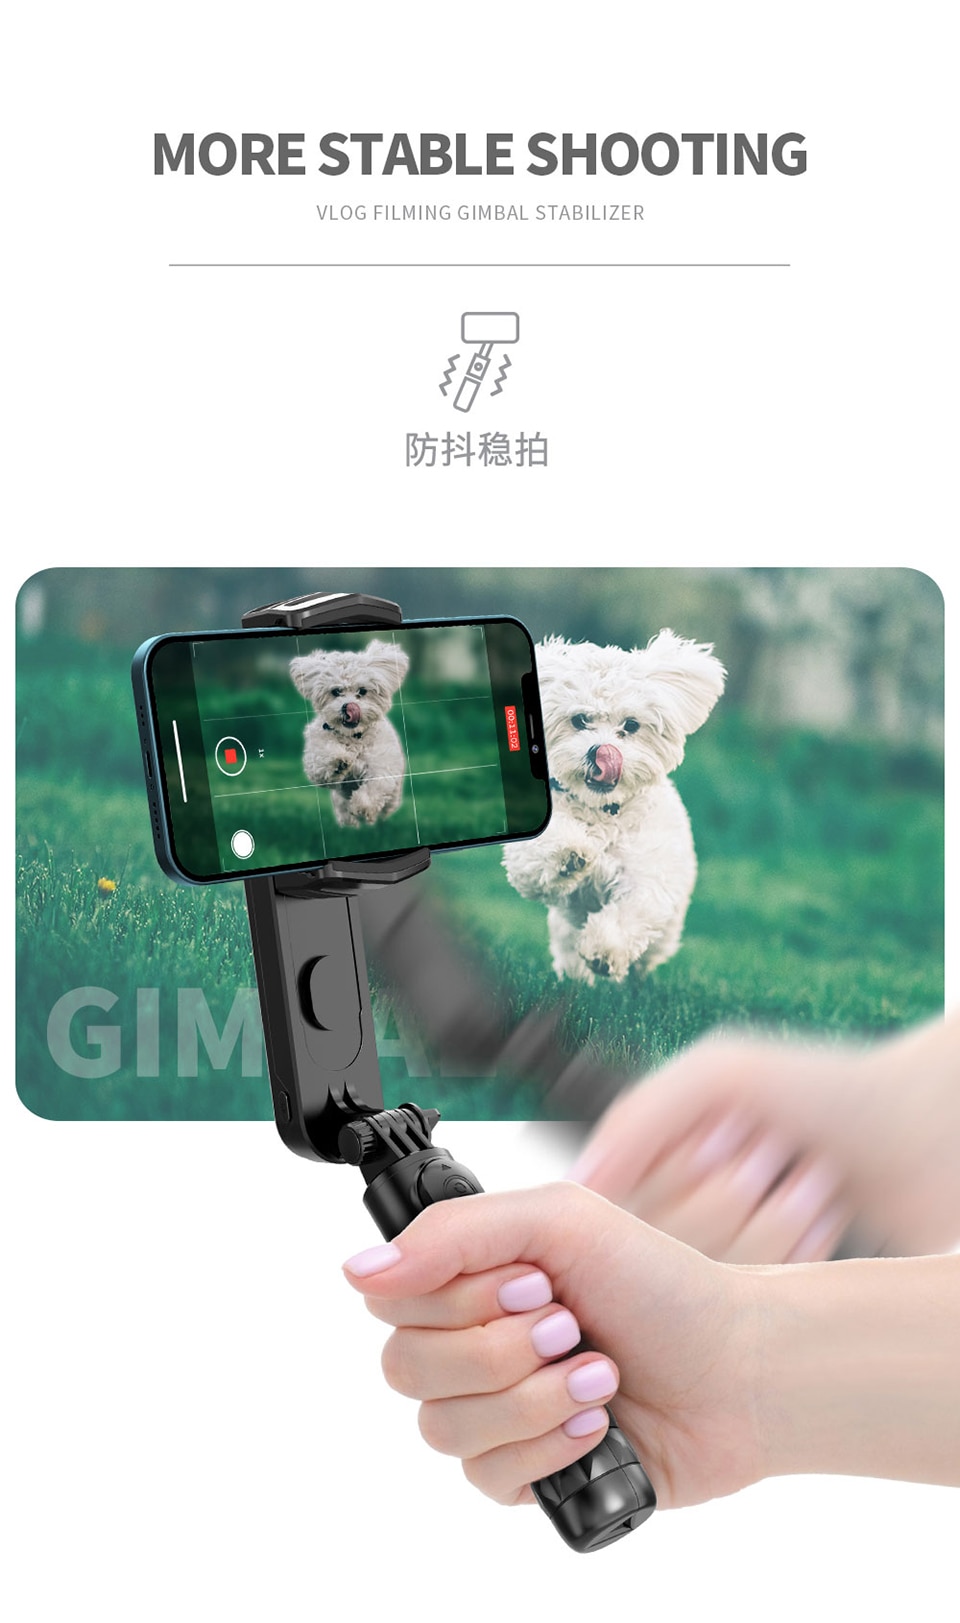 FANGTUOSI Q09 Wireless Bluetooth Selfie Stick Tripod Handheld Gimbal Stabilizer Monopod With fill light shutter for IOS Android